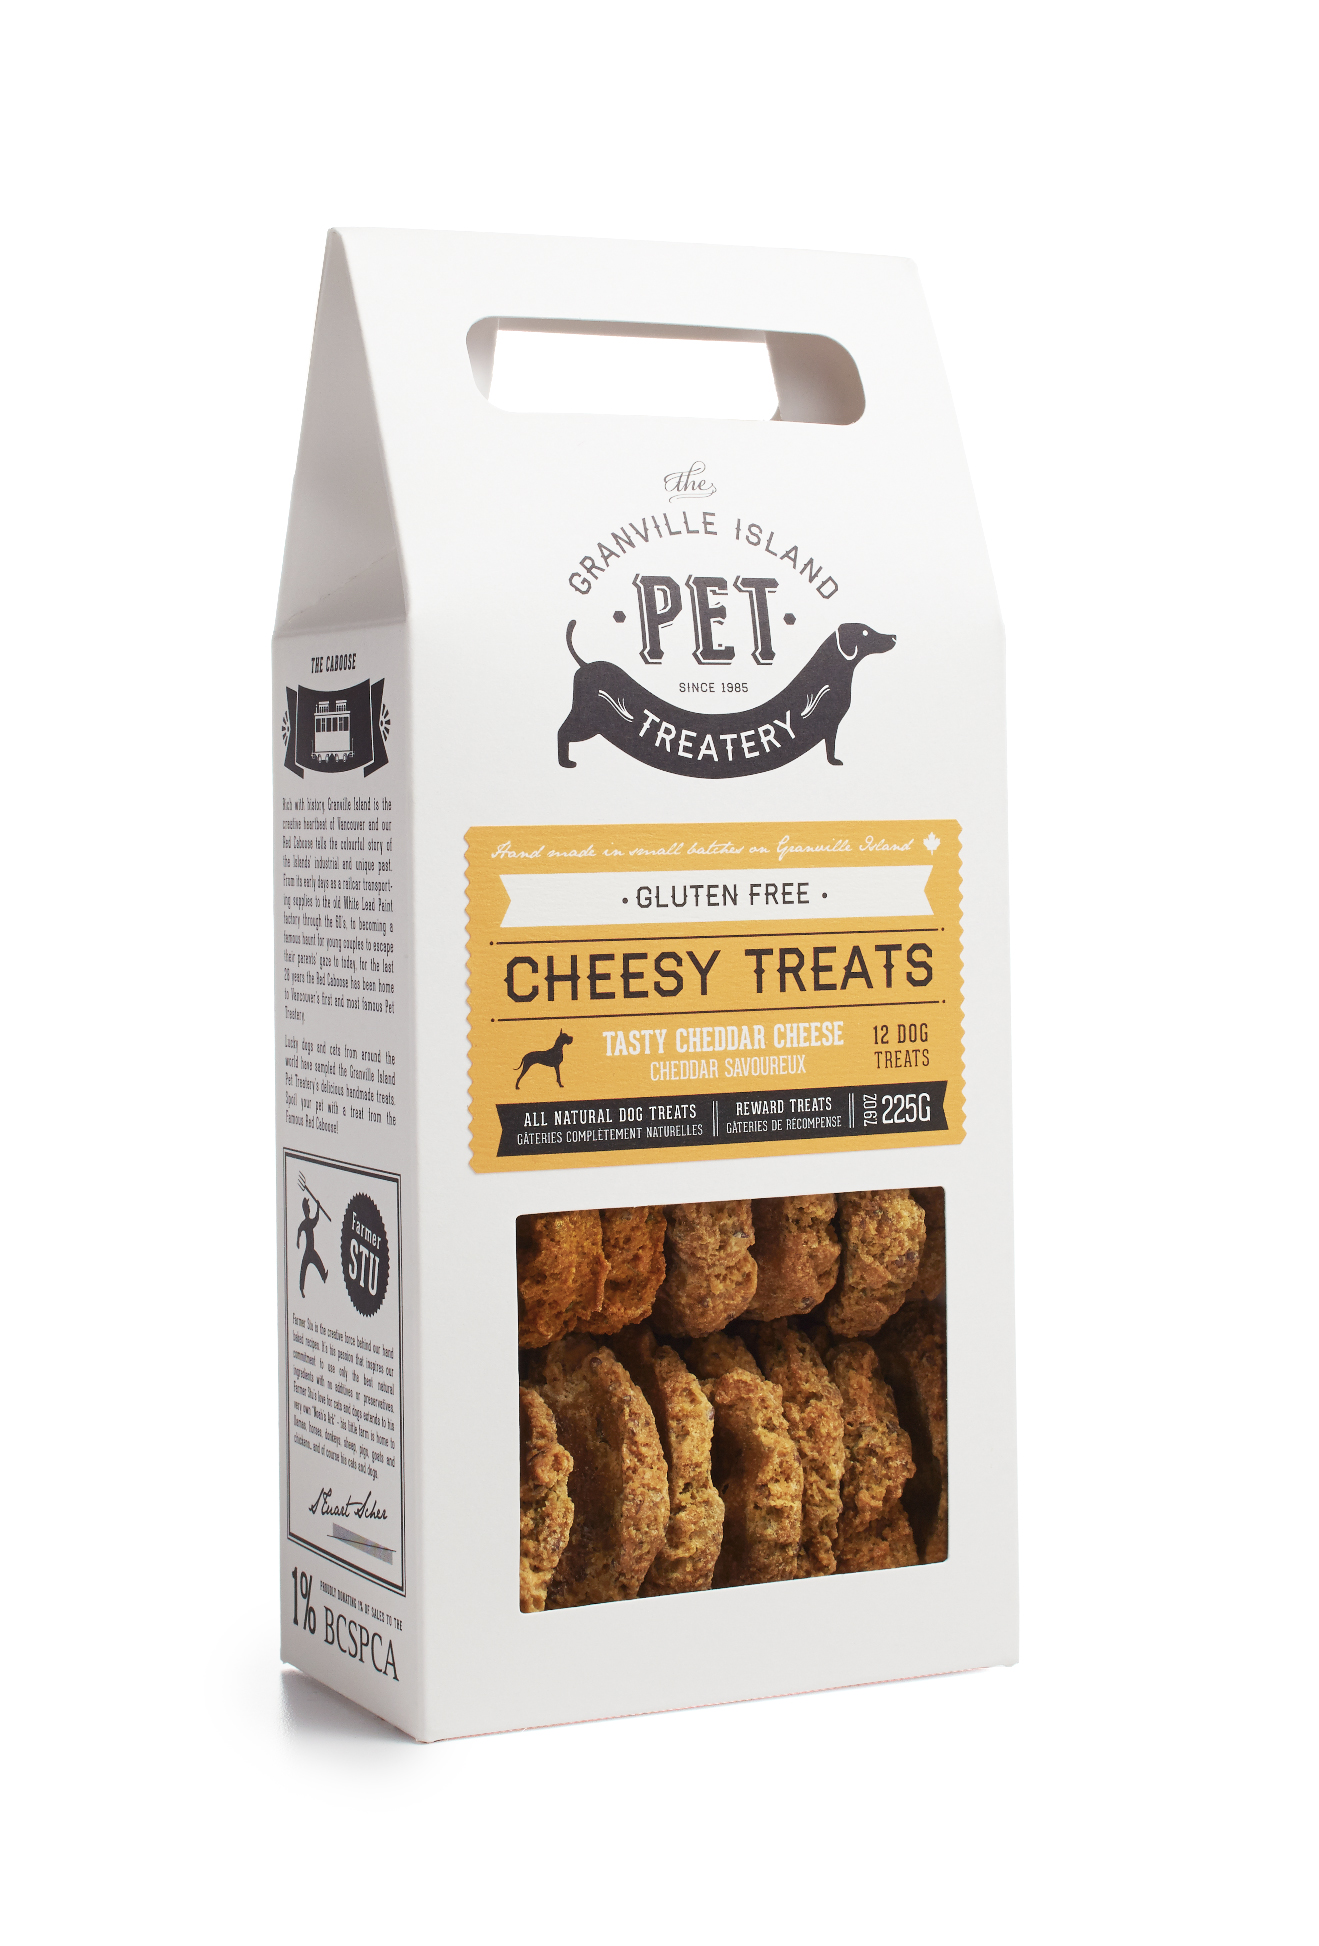 Packaging and branding for pet food brand Granville Island Pet Treatery.